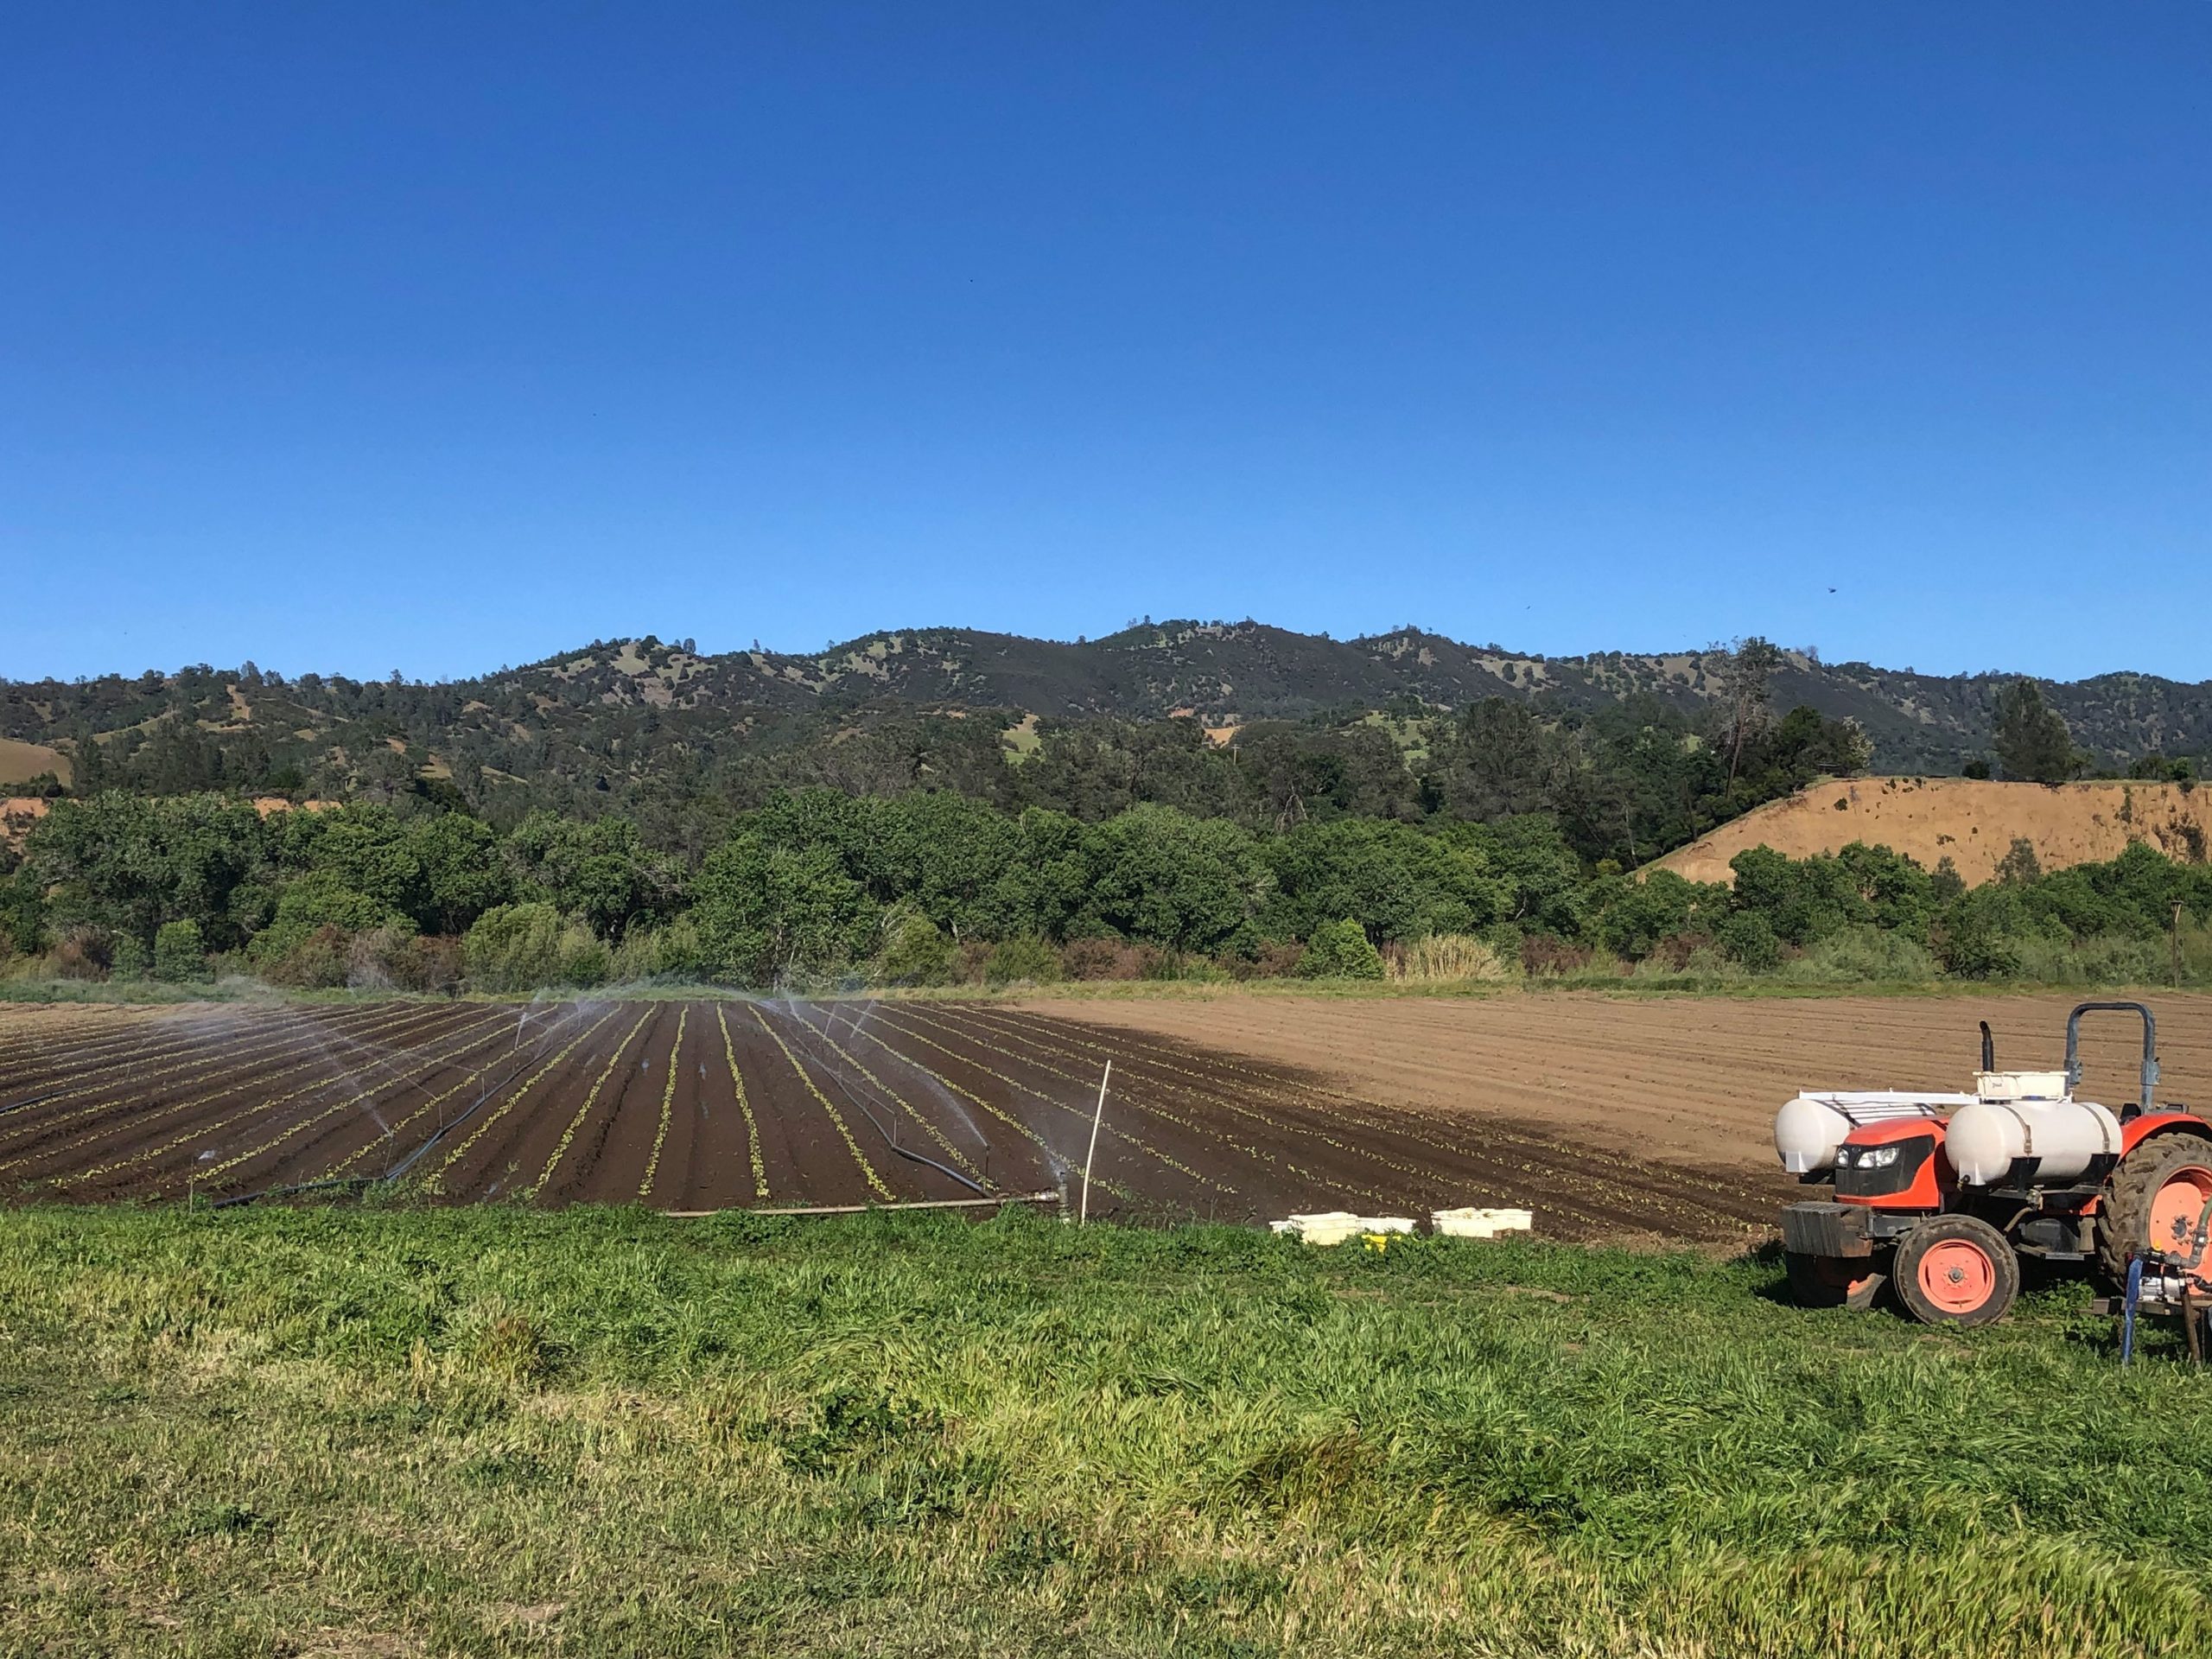 Full Belly Farm, a 450-acre, organic farm, in California's Capay Valley northwest of Sacramento, is busier than ever trying to ramp up production to meet soaring demand.